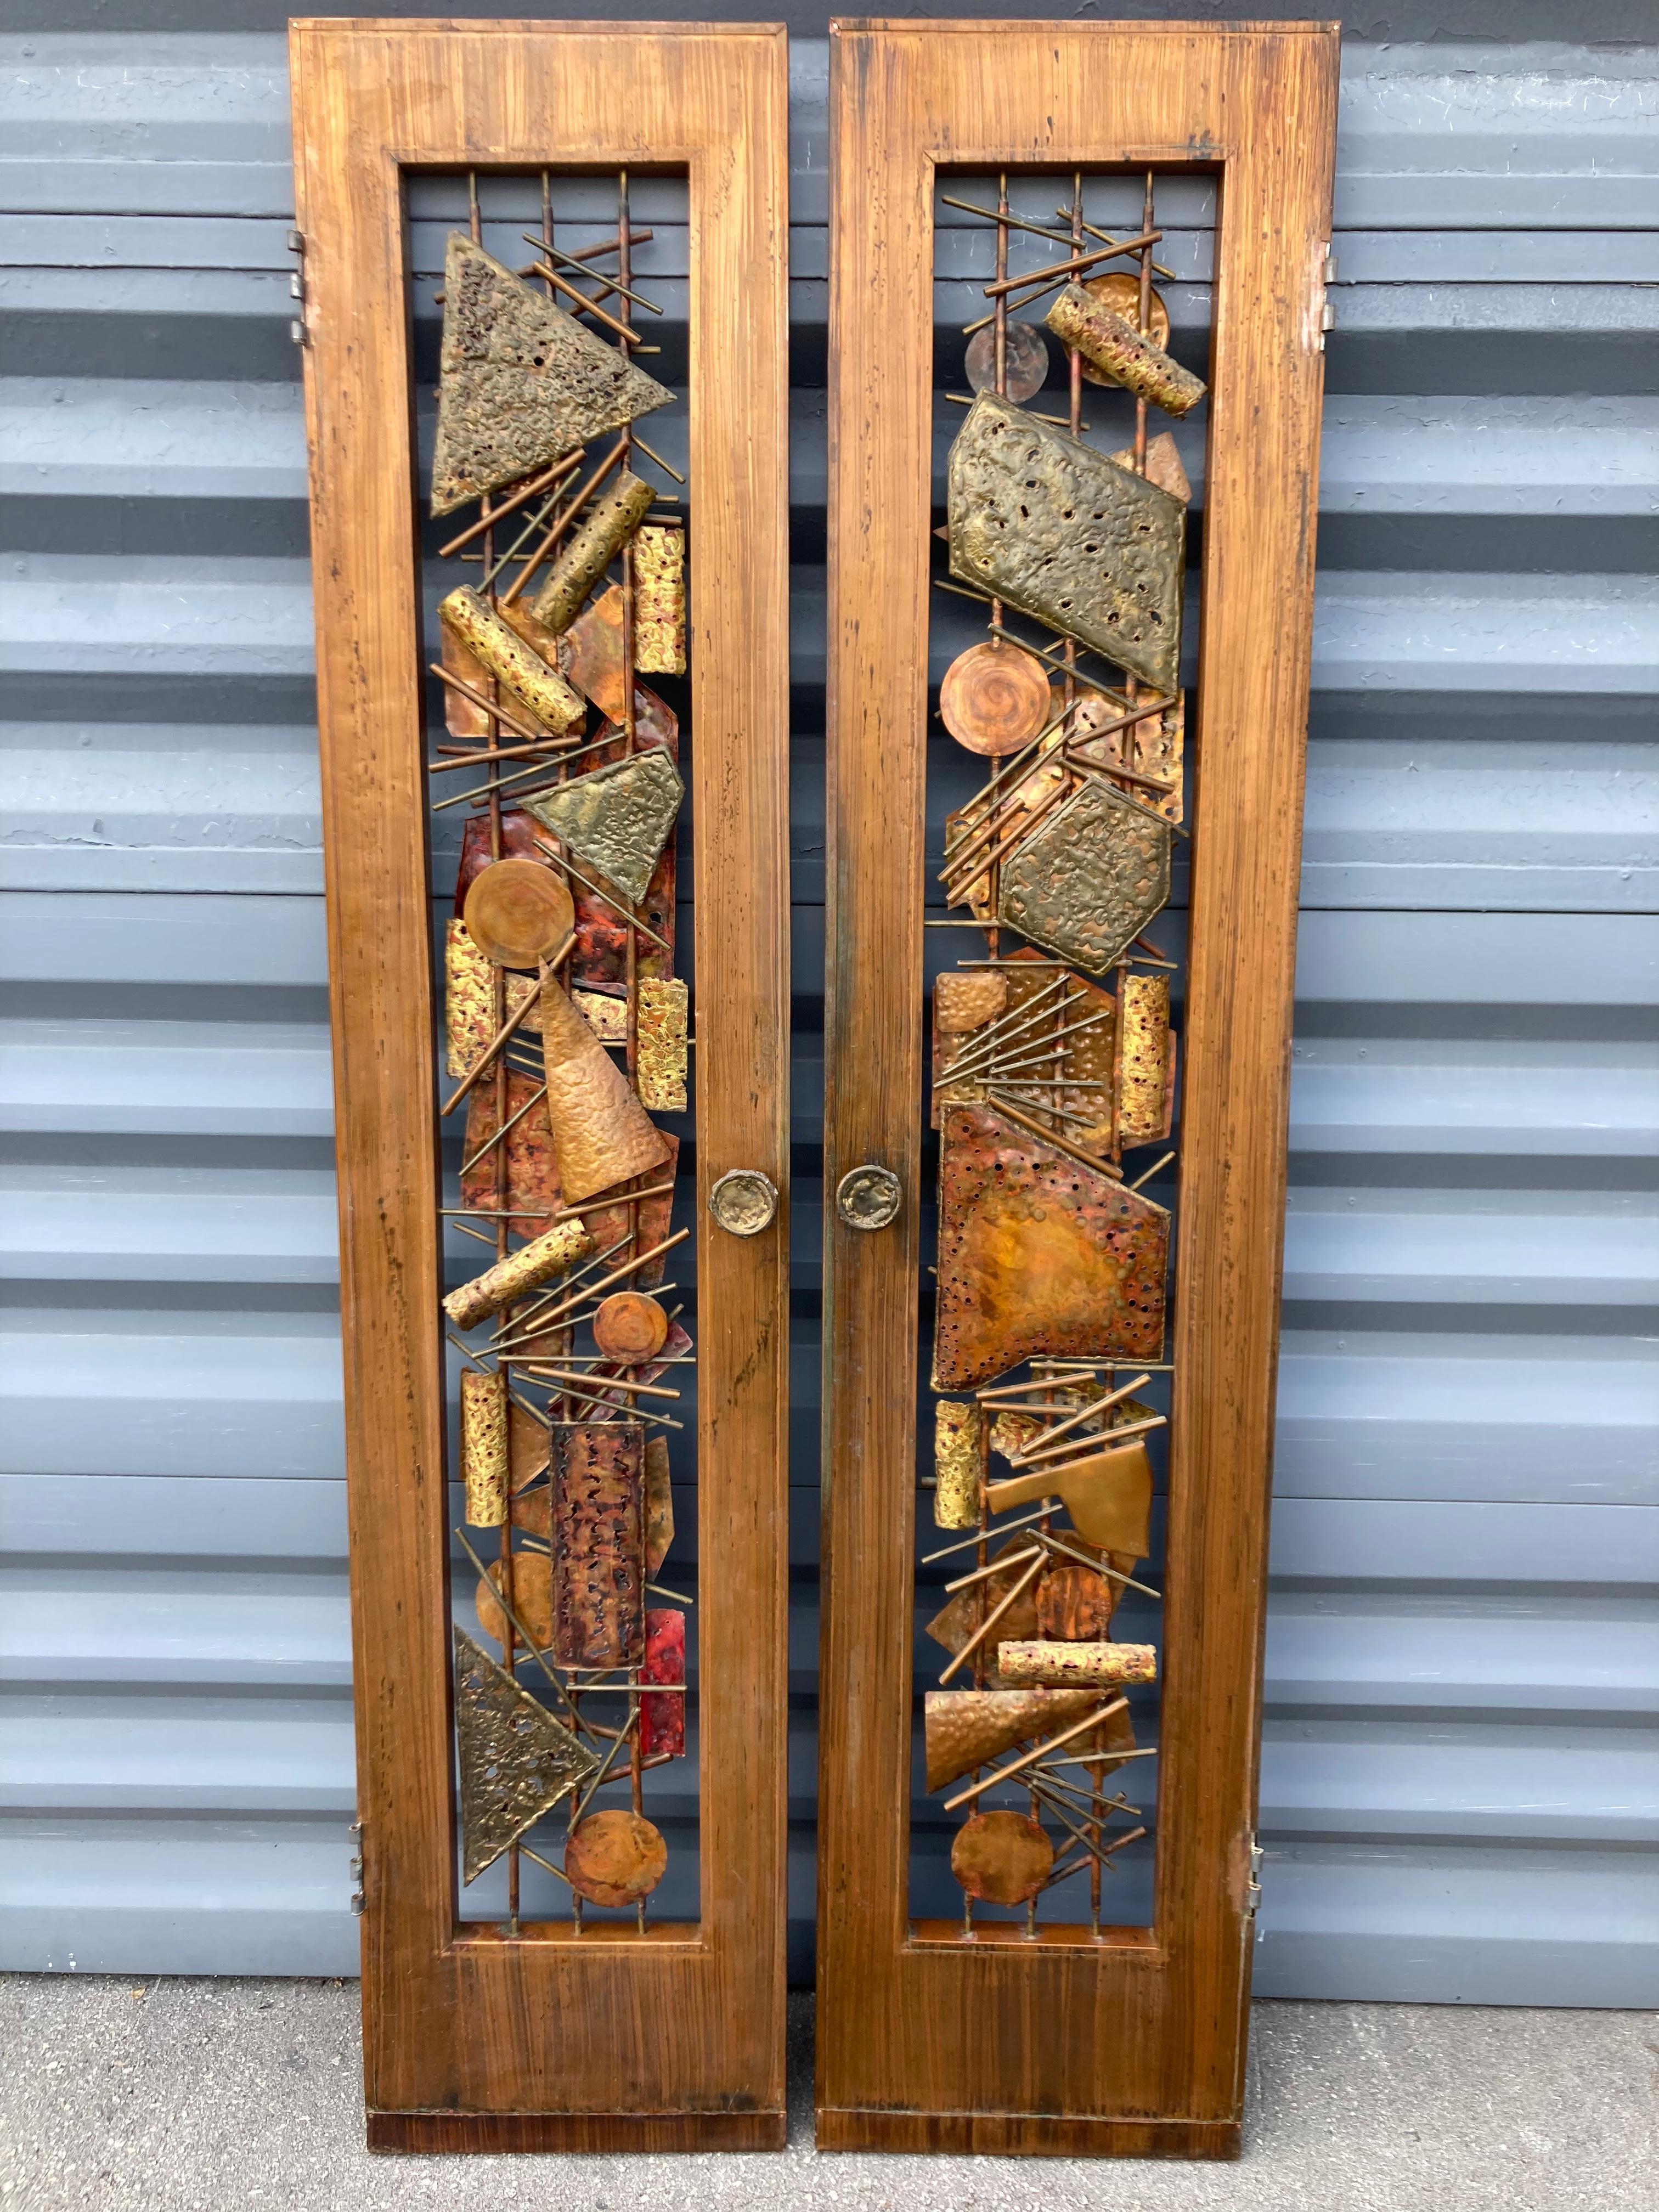 Pair of Roy R. Butler Copper Doors, bought from the original owner. Signed, please see pictures.
Measures: One door is 17.13 wide and the other is 16.88 wide. 
The depth of 1.50” is measured without door knobs.